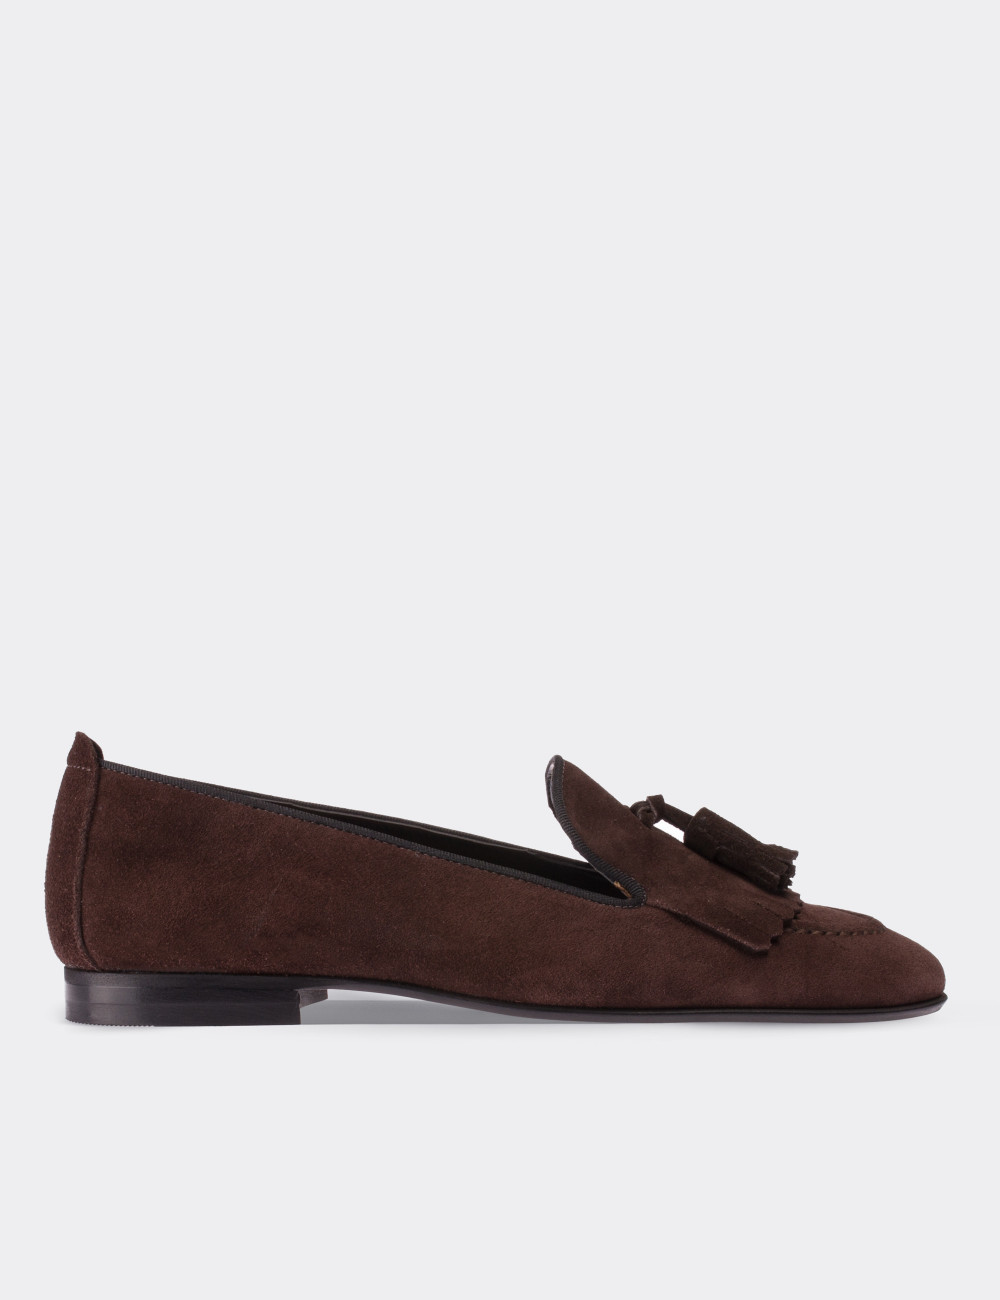 Brown Suede Leather Loafers - 01618ZKHVM01